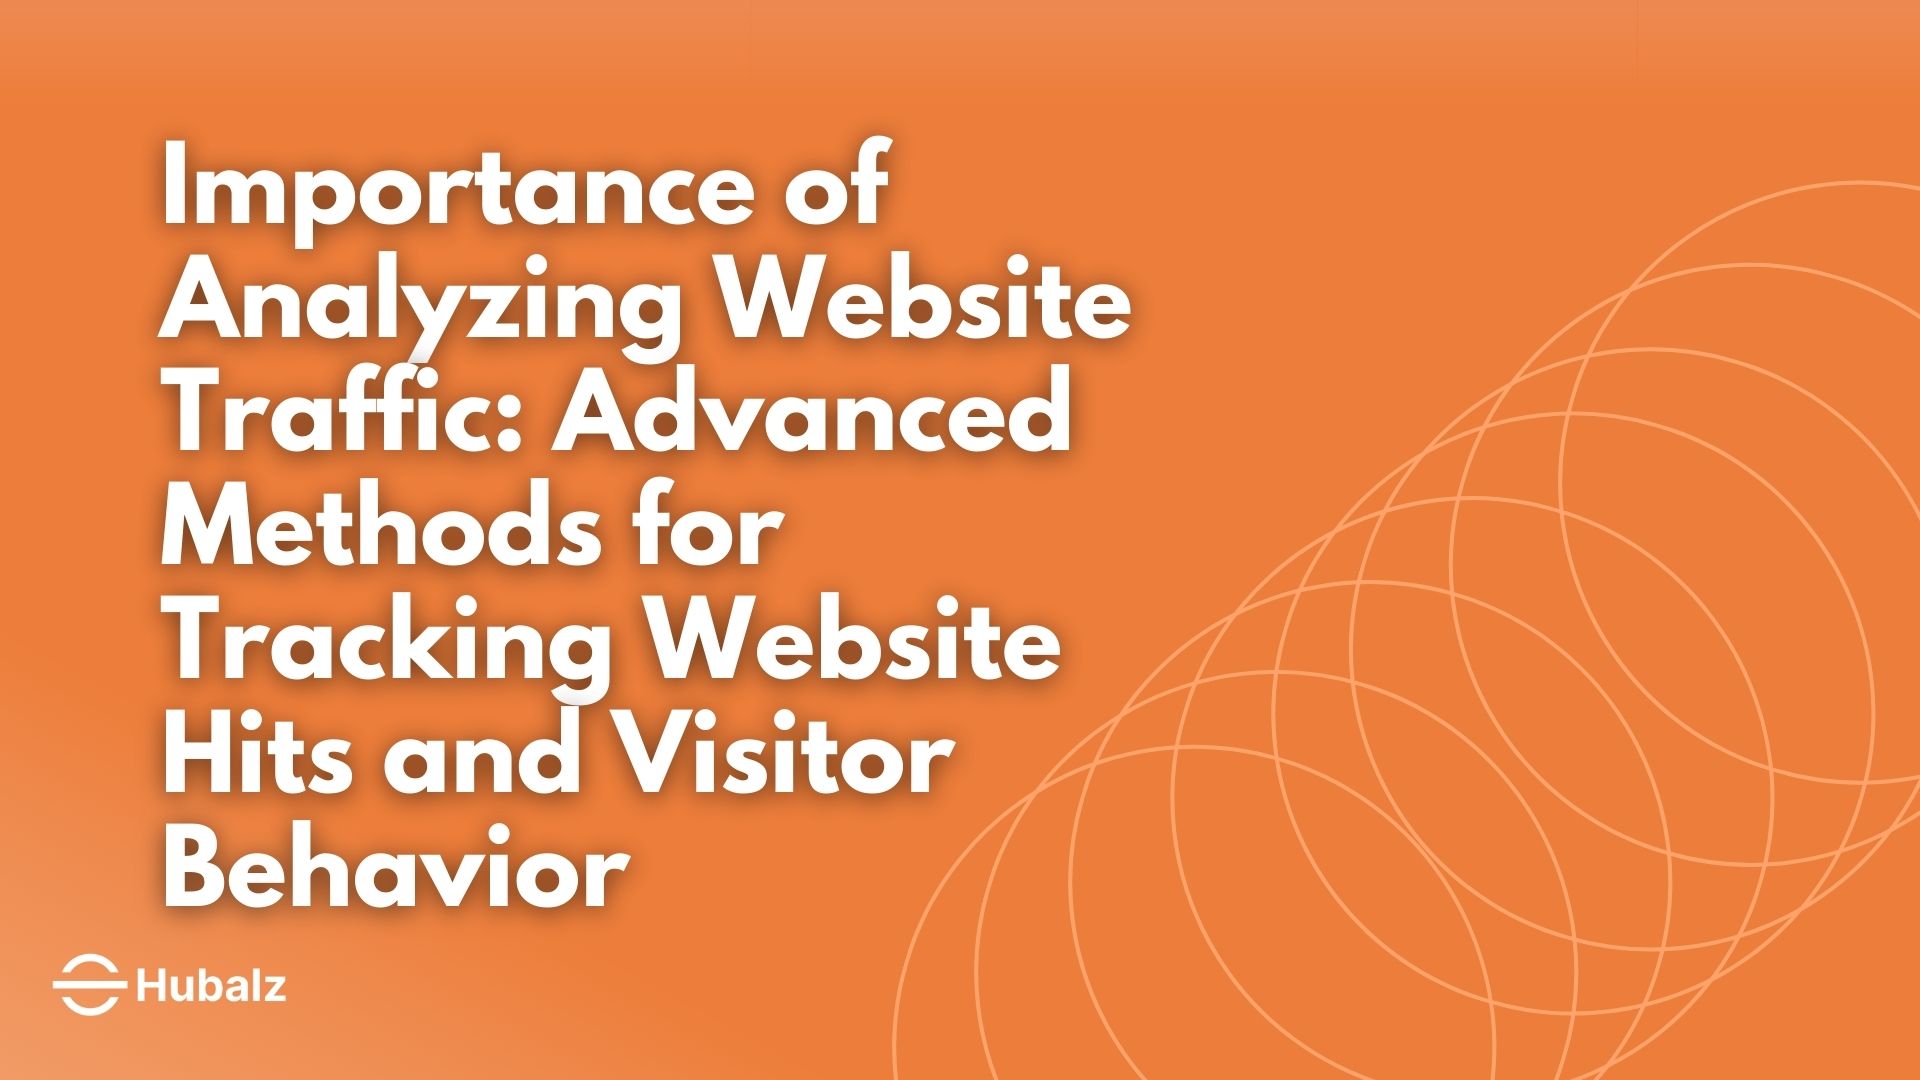 Importance of Analyzing Website Traffic: Advanced Methods for Tracking Website Hits and Visitor Behavior